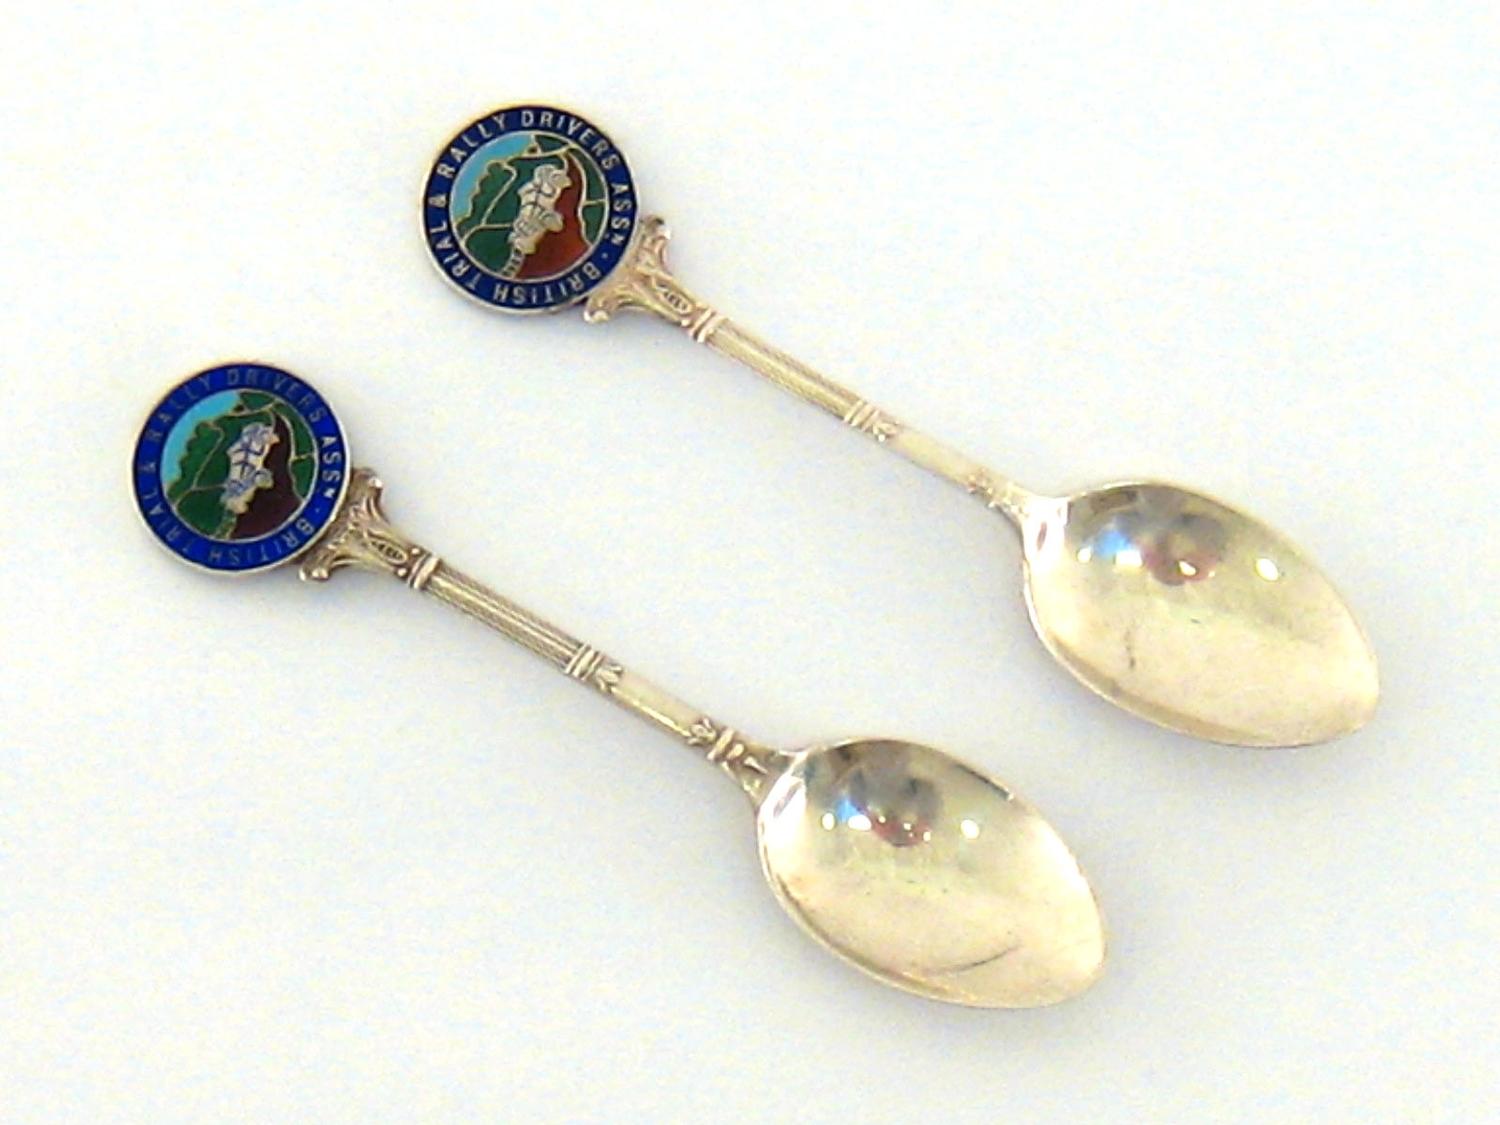 Motoring interest. A matched pair of teaspoons with the enamelled badge of the British Trial and